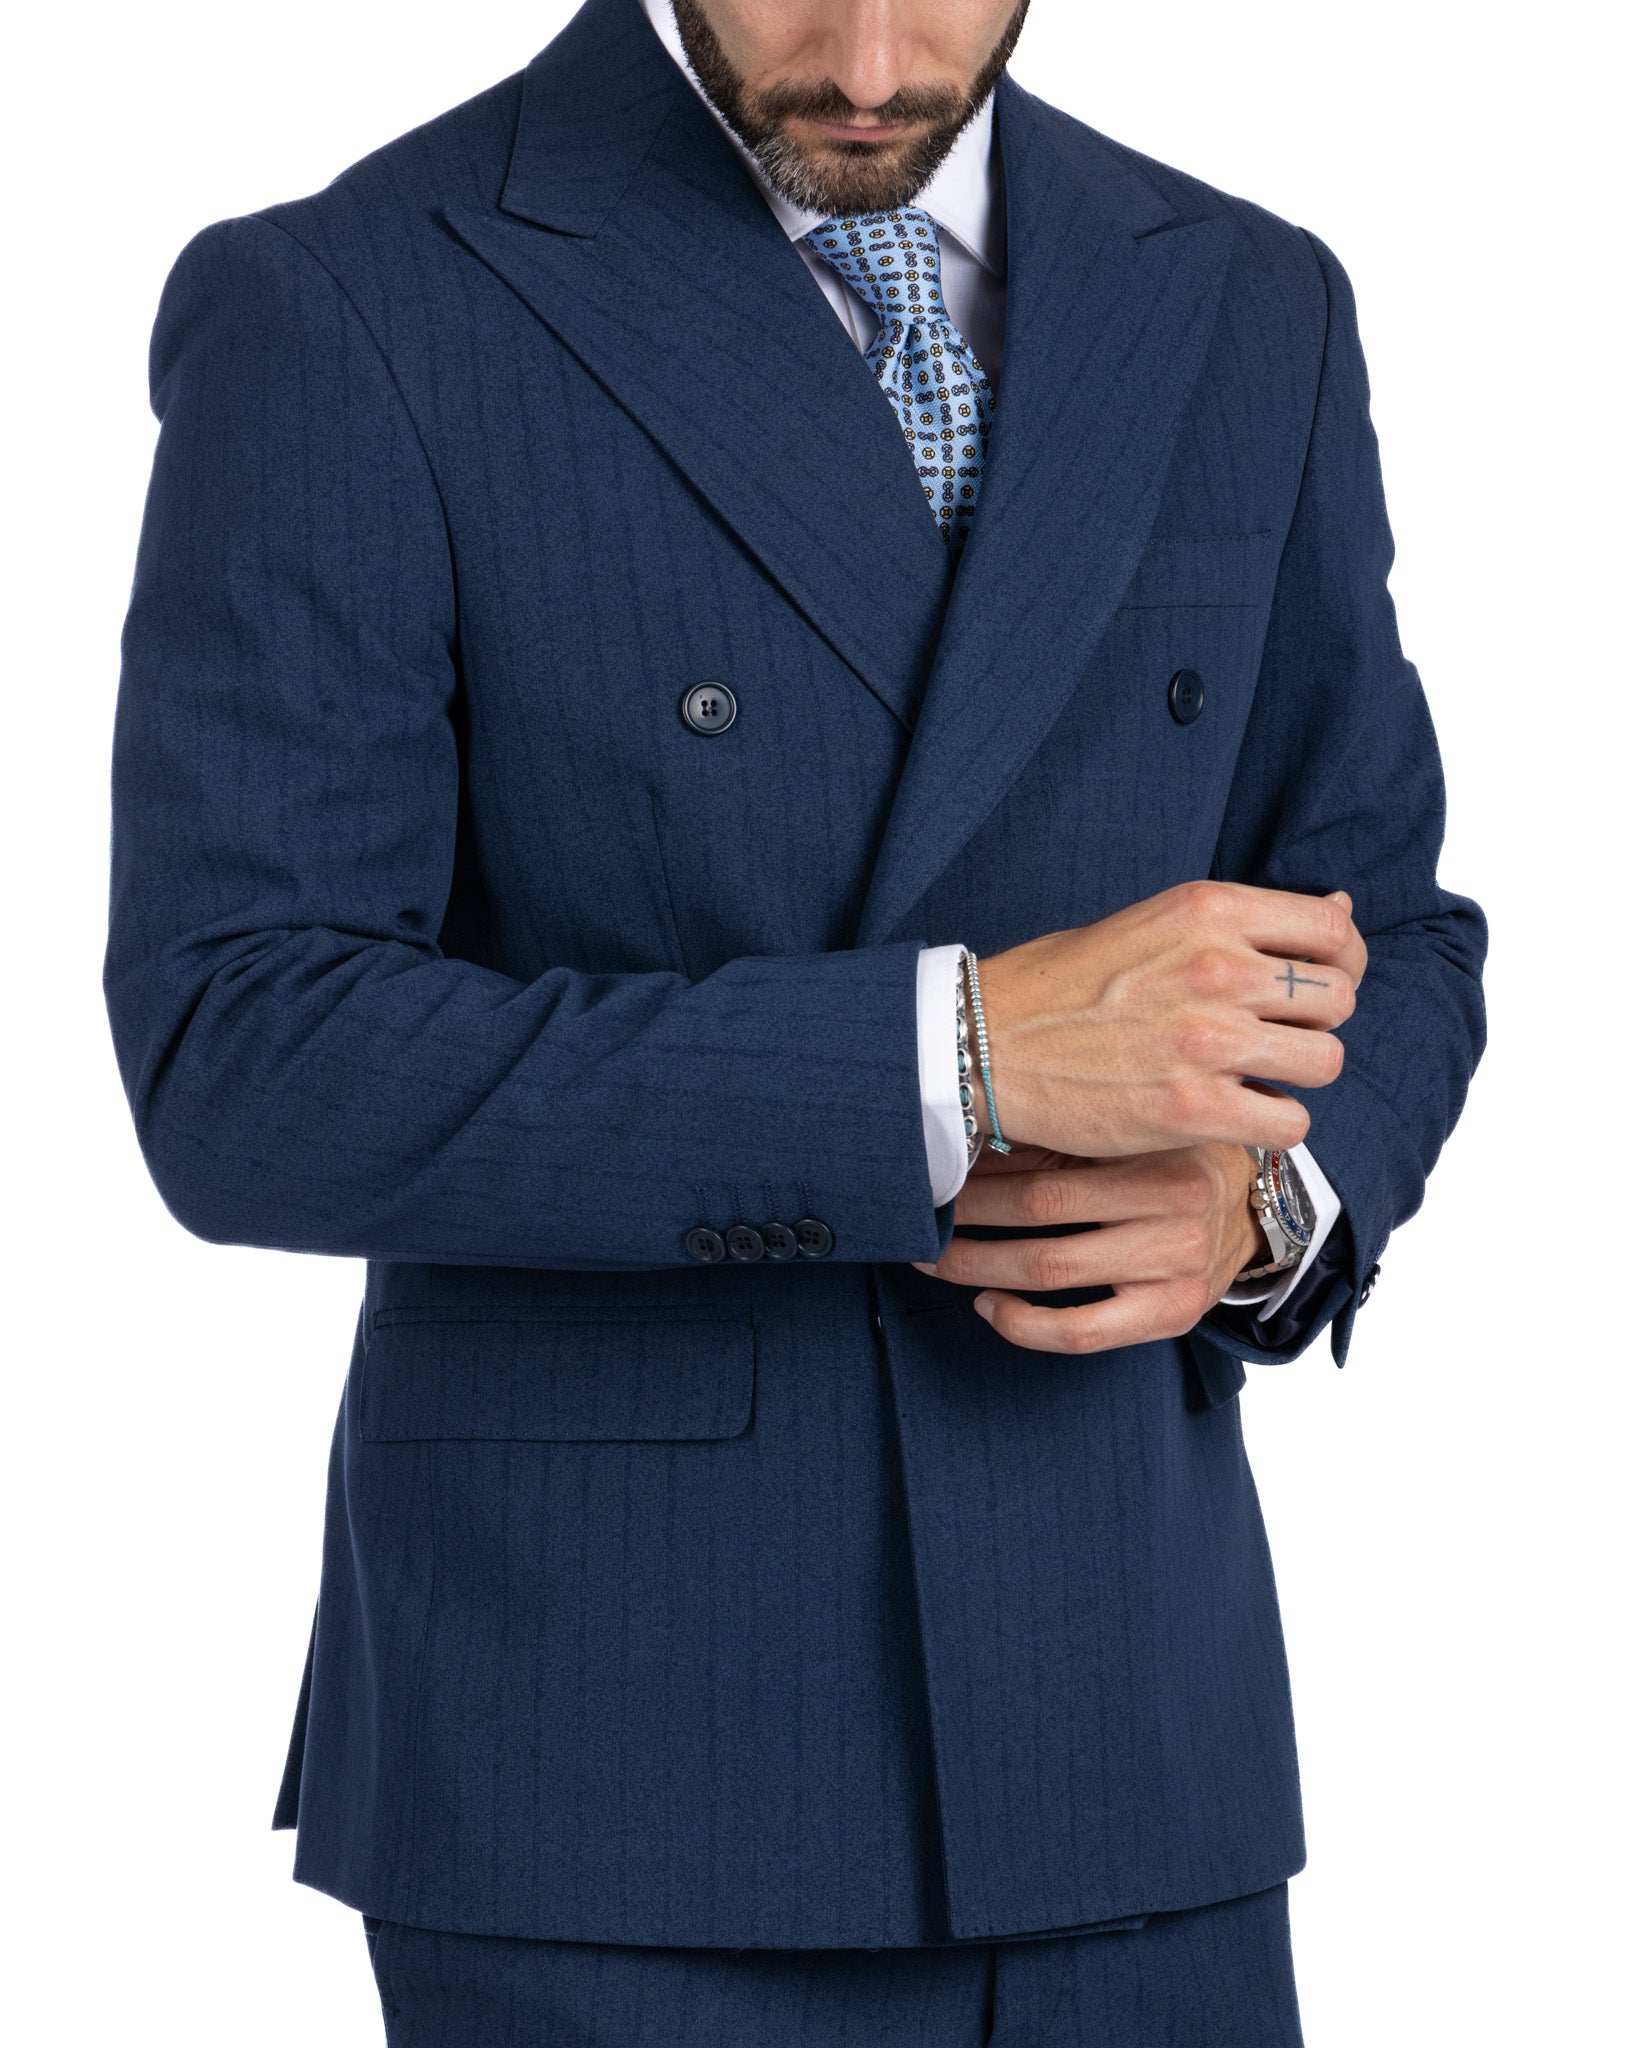 Enzo - double-breasted blue pinstriped suit